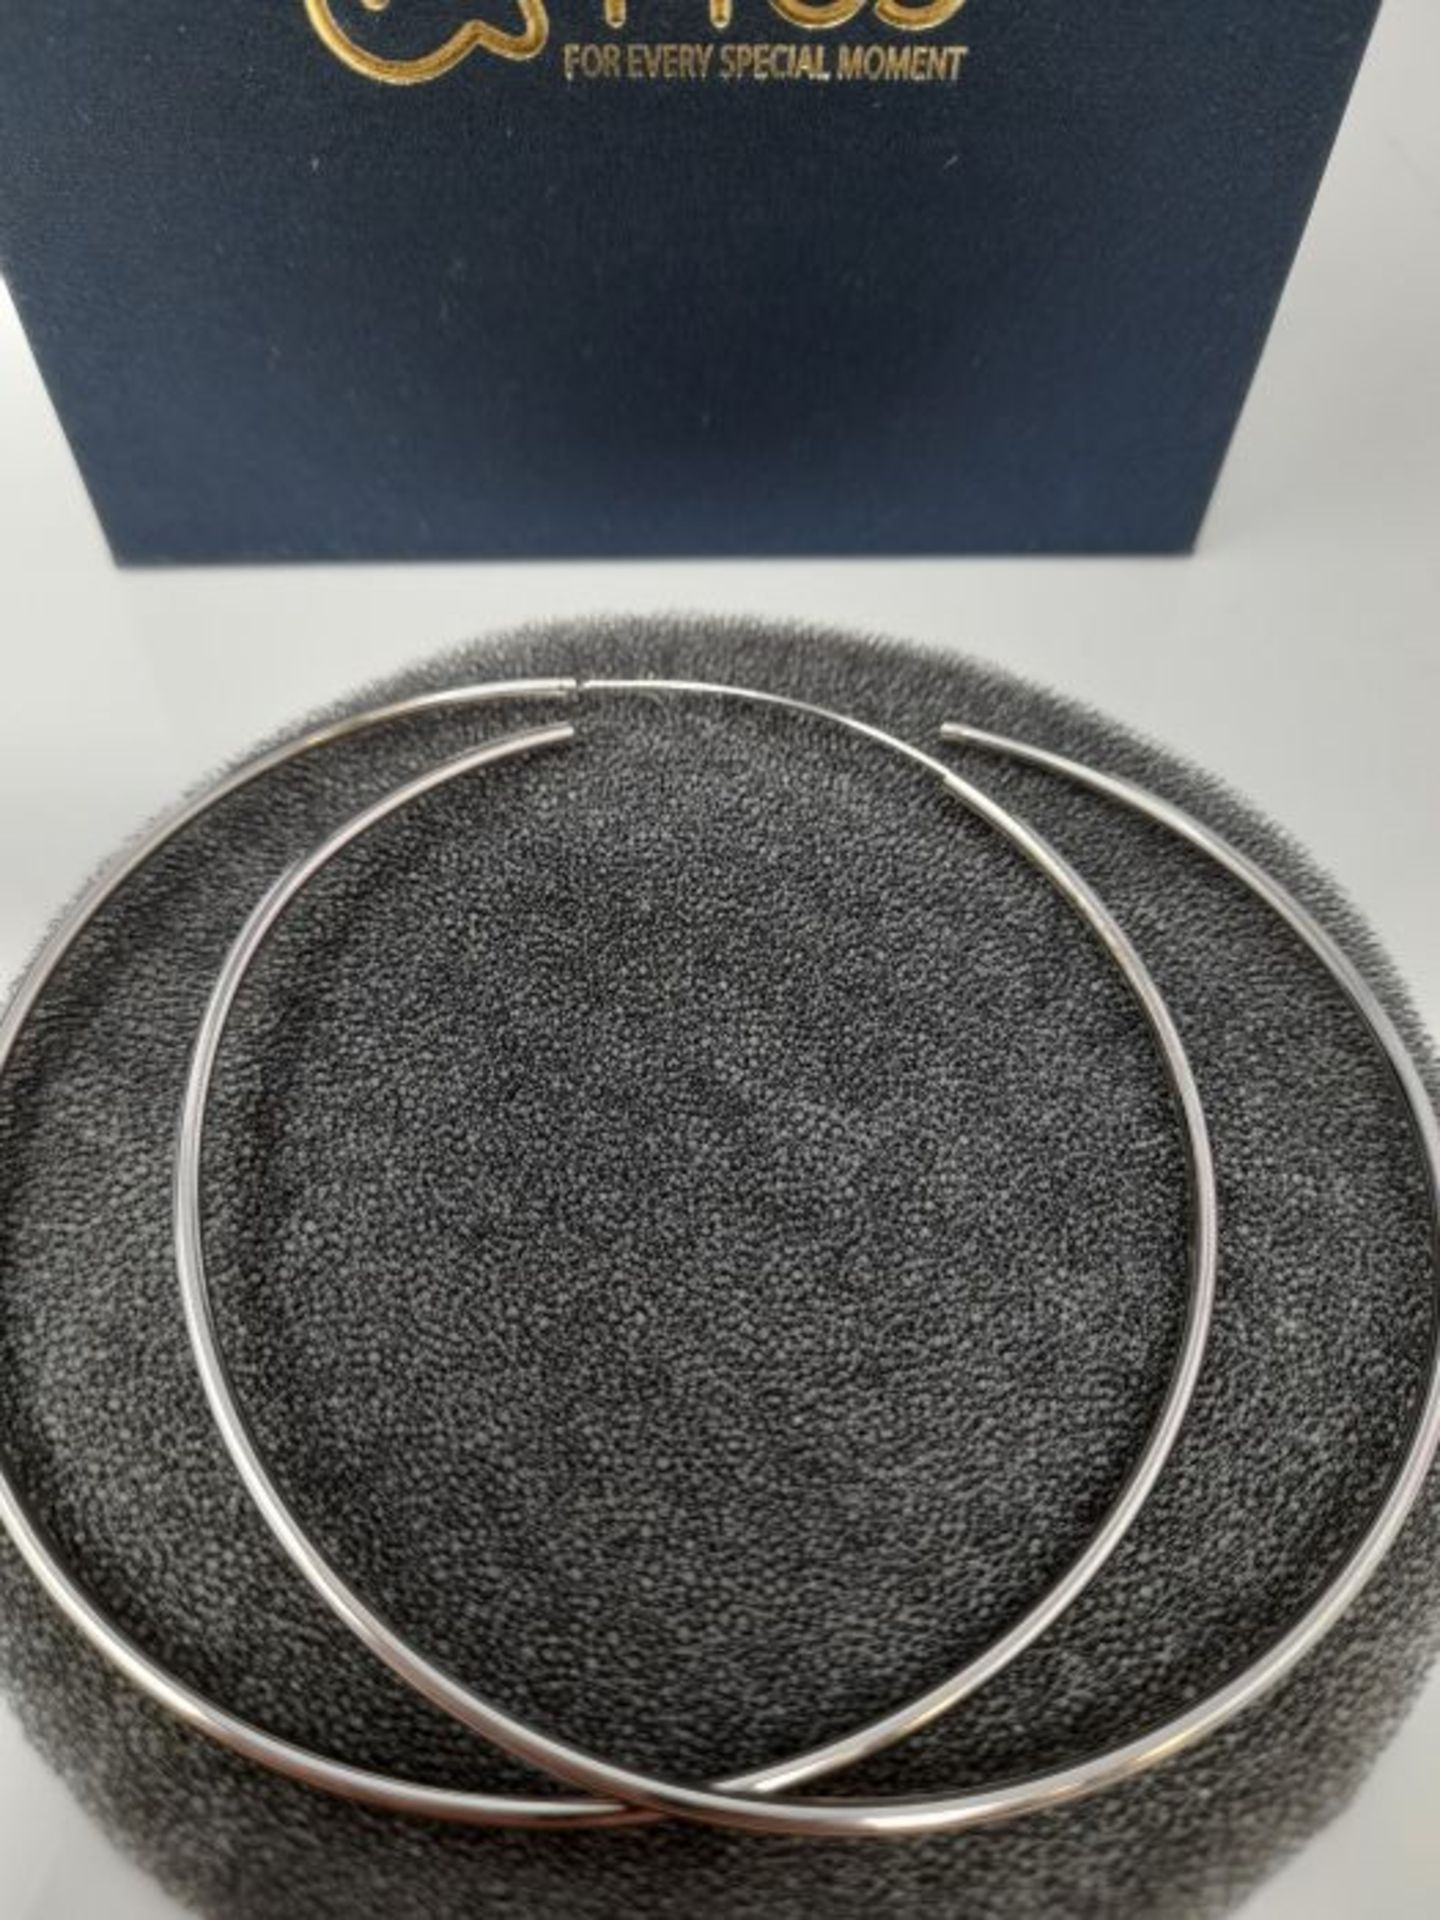 T400 Jewelers 925 Sterling Silver Polished Round Circle Endless Hoop Earrings,Size 70 - Image 3 of 3